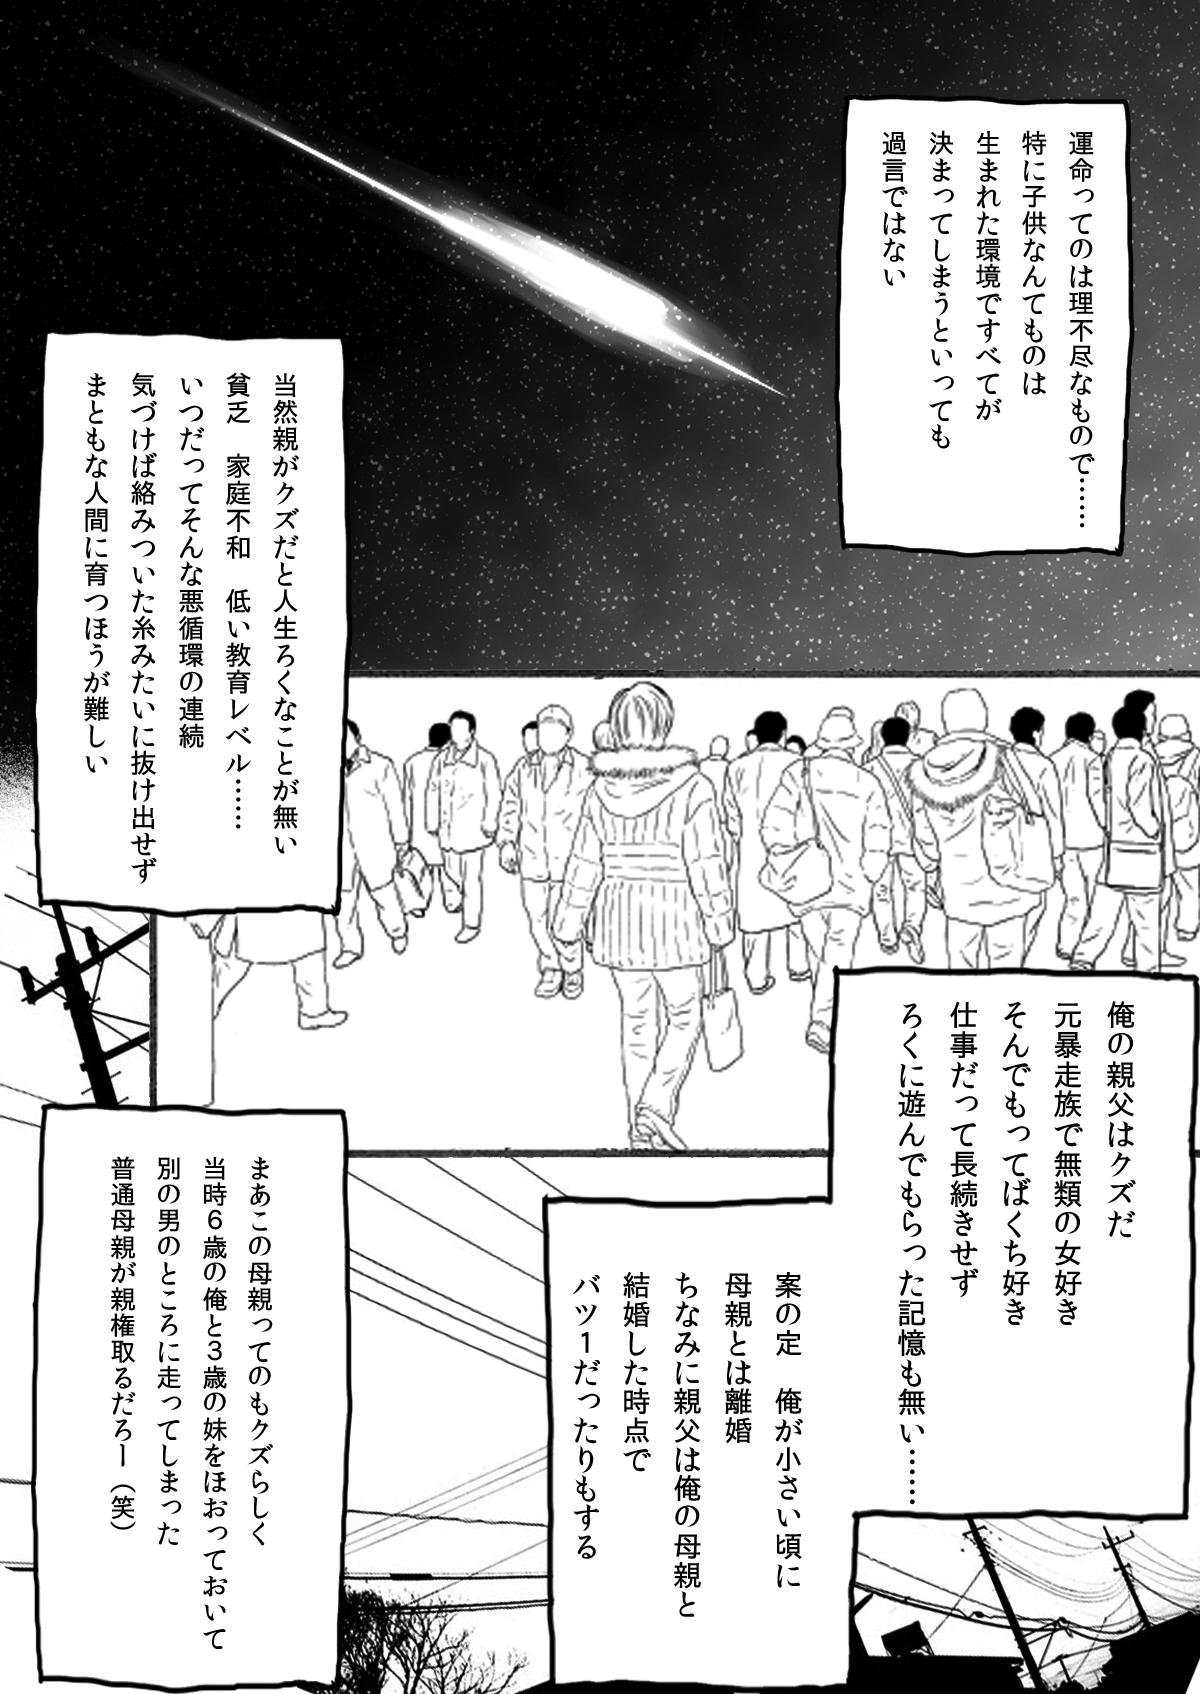 Beurette 大家族の長男ですが何か？ Girl Girl - Page 4